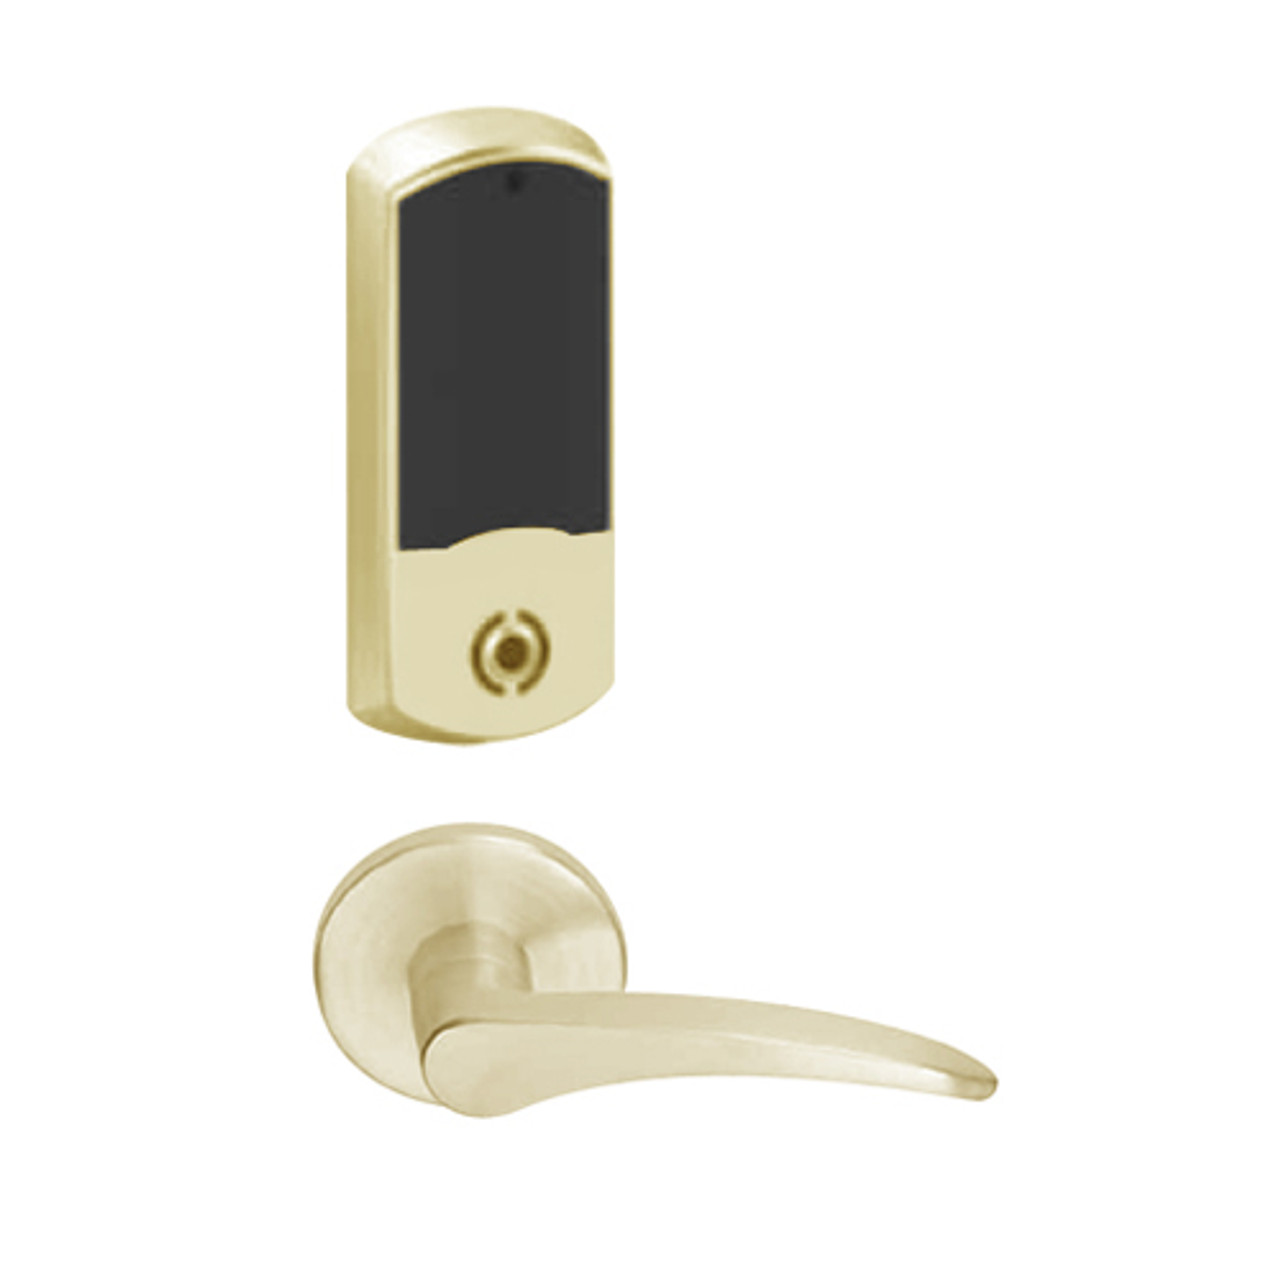 LEMS-GRW-BD-12-606-00C-LH Schlage Storeroom Wireless Greenwich Mortise Lock with LED Indicator and 12 Lever Prepped for SFIC in Satin Brass